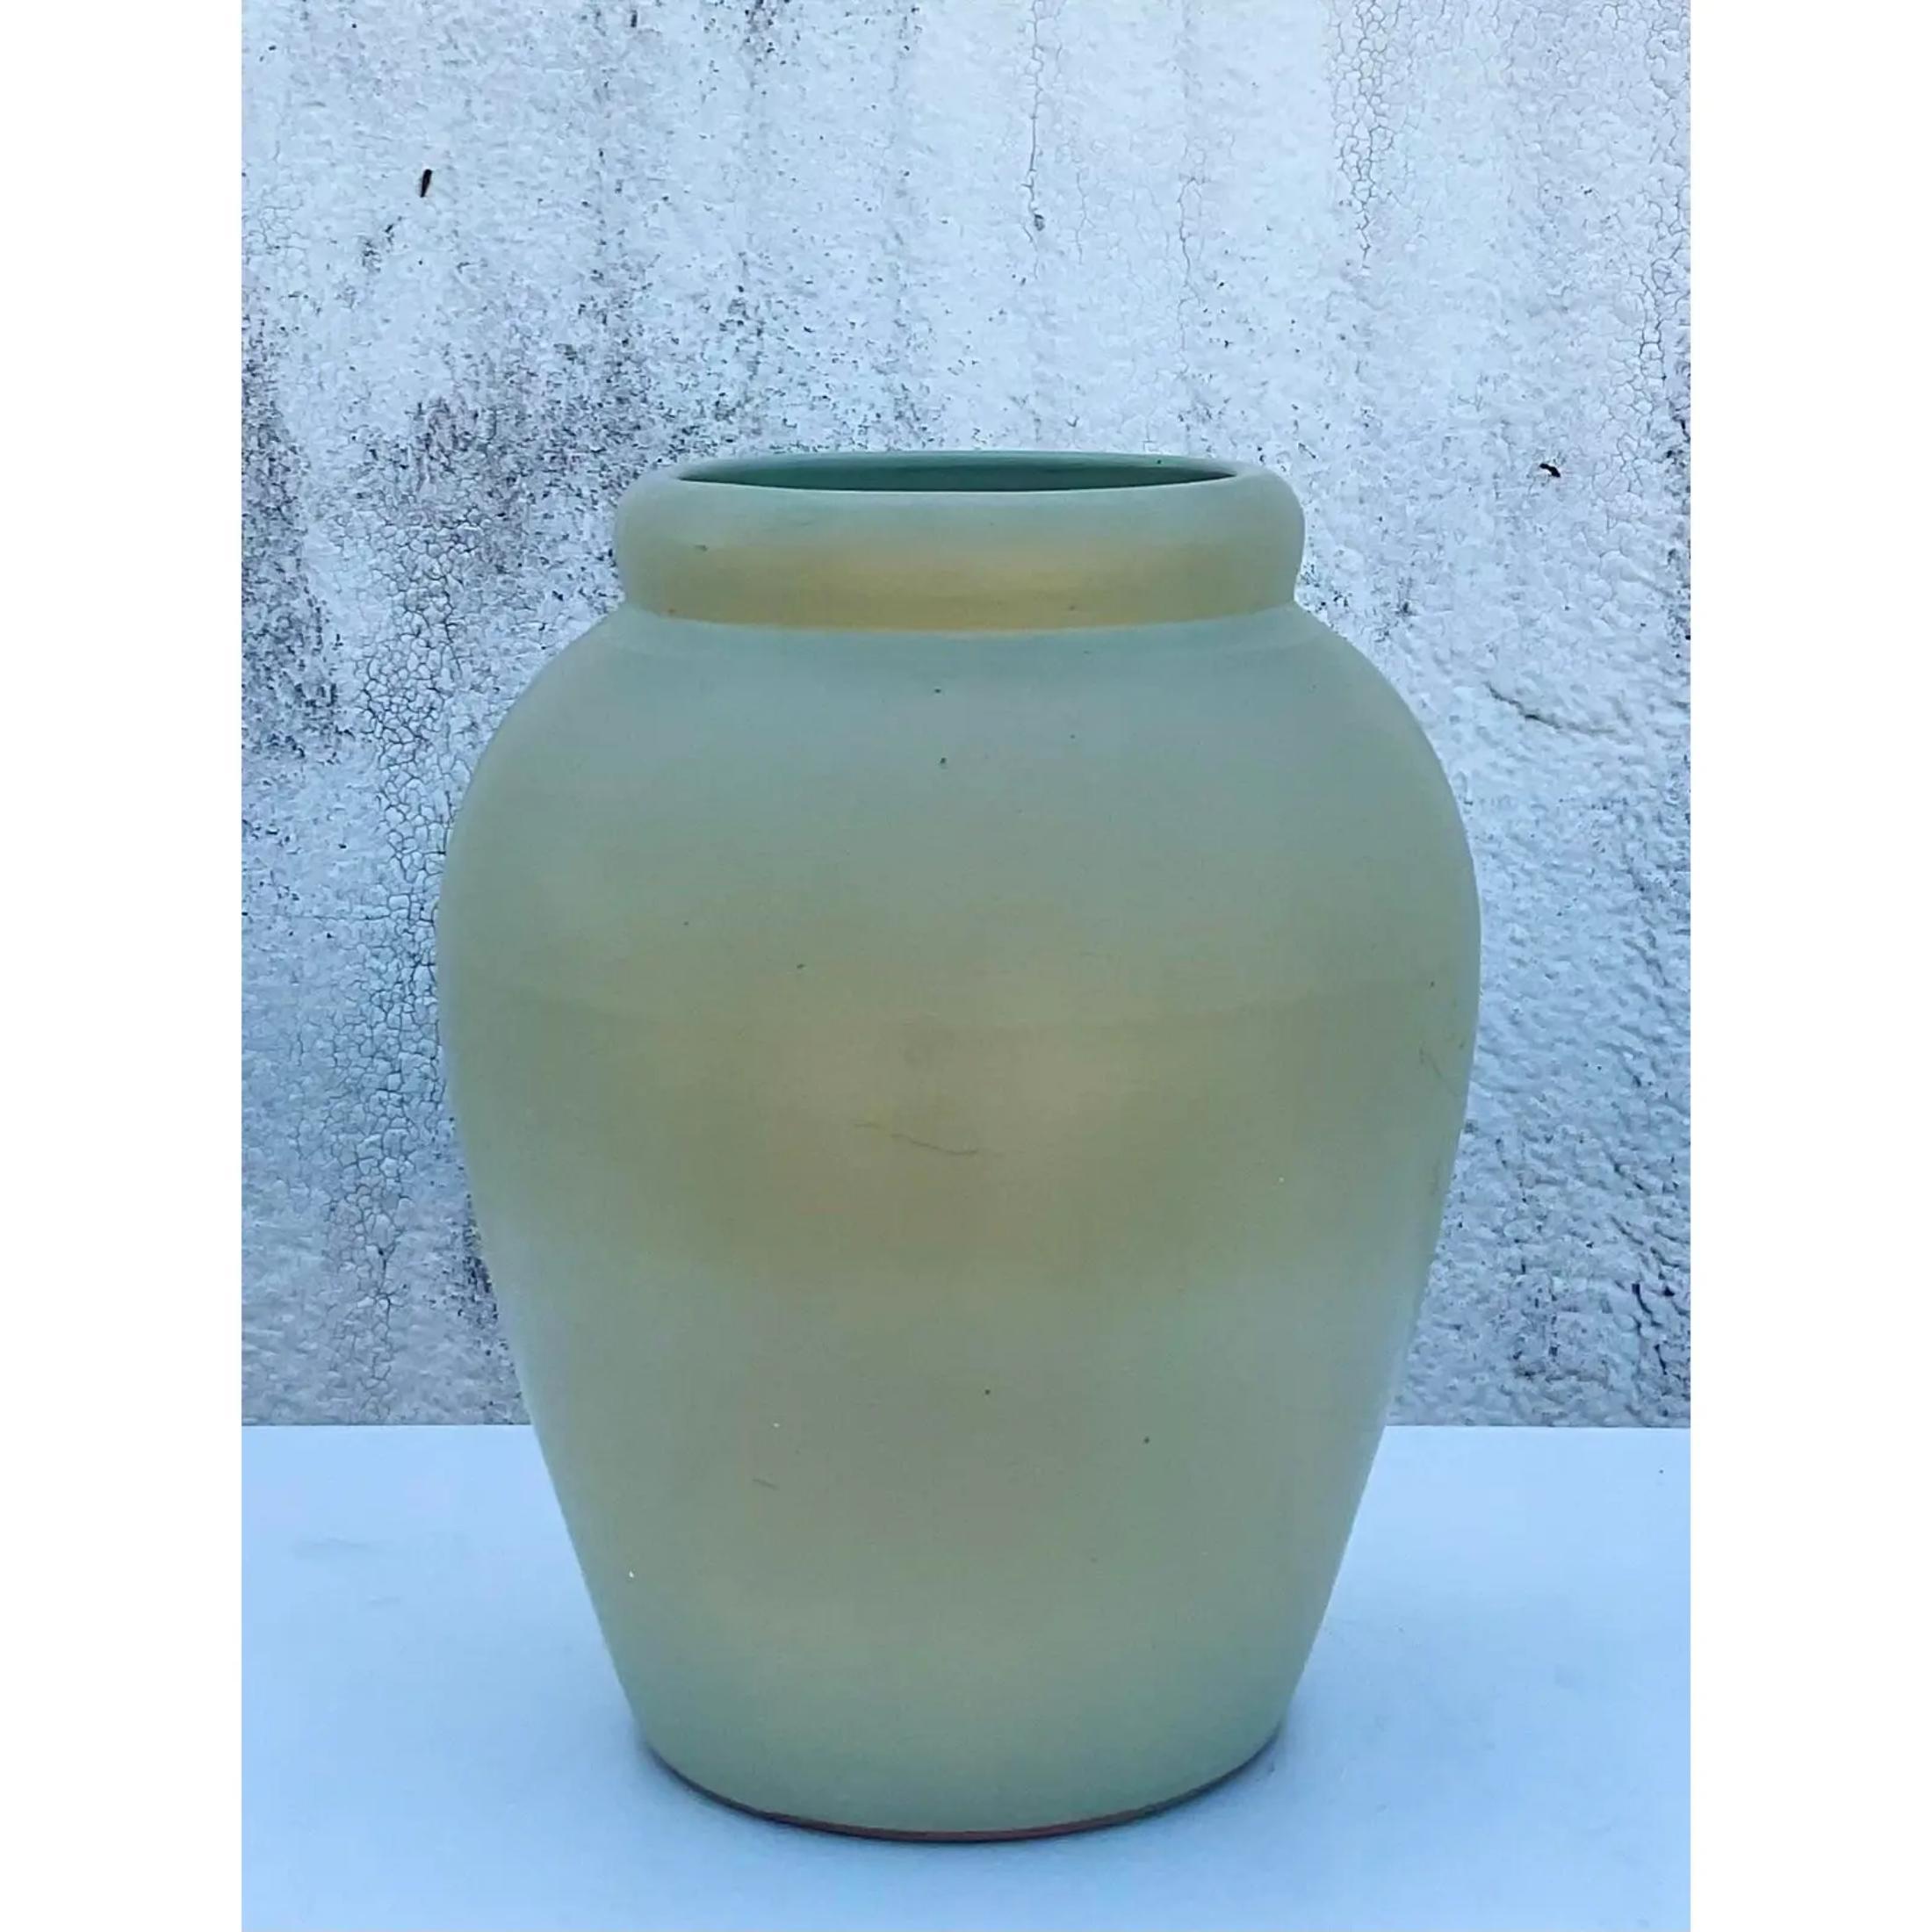 Vintage Contemporary ceramic urn. Beautiful matte glazed finish in a chic sage green color. Drilled for drainage. Part of a collection of urns that are also available on my Chairish page. Acquired from a Palm Beach estate